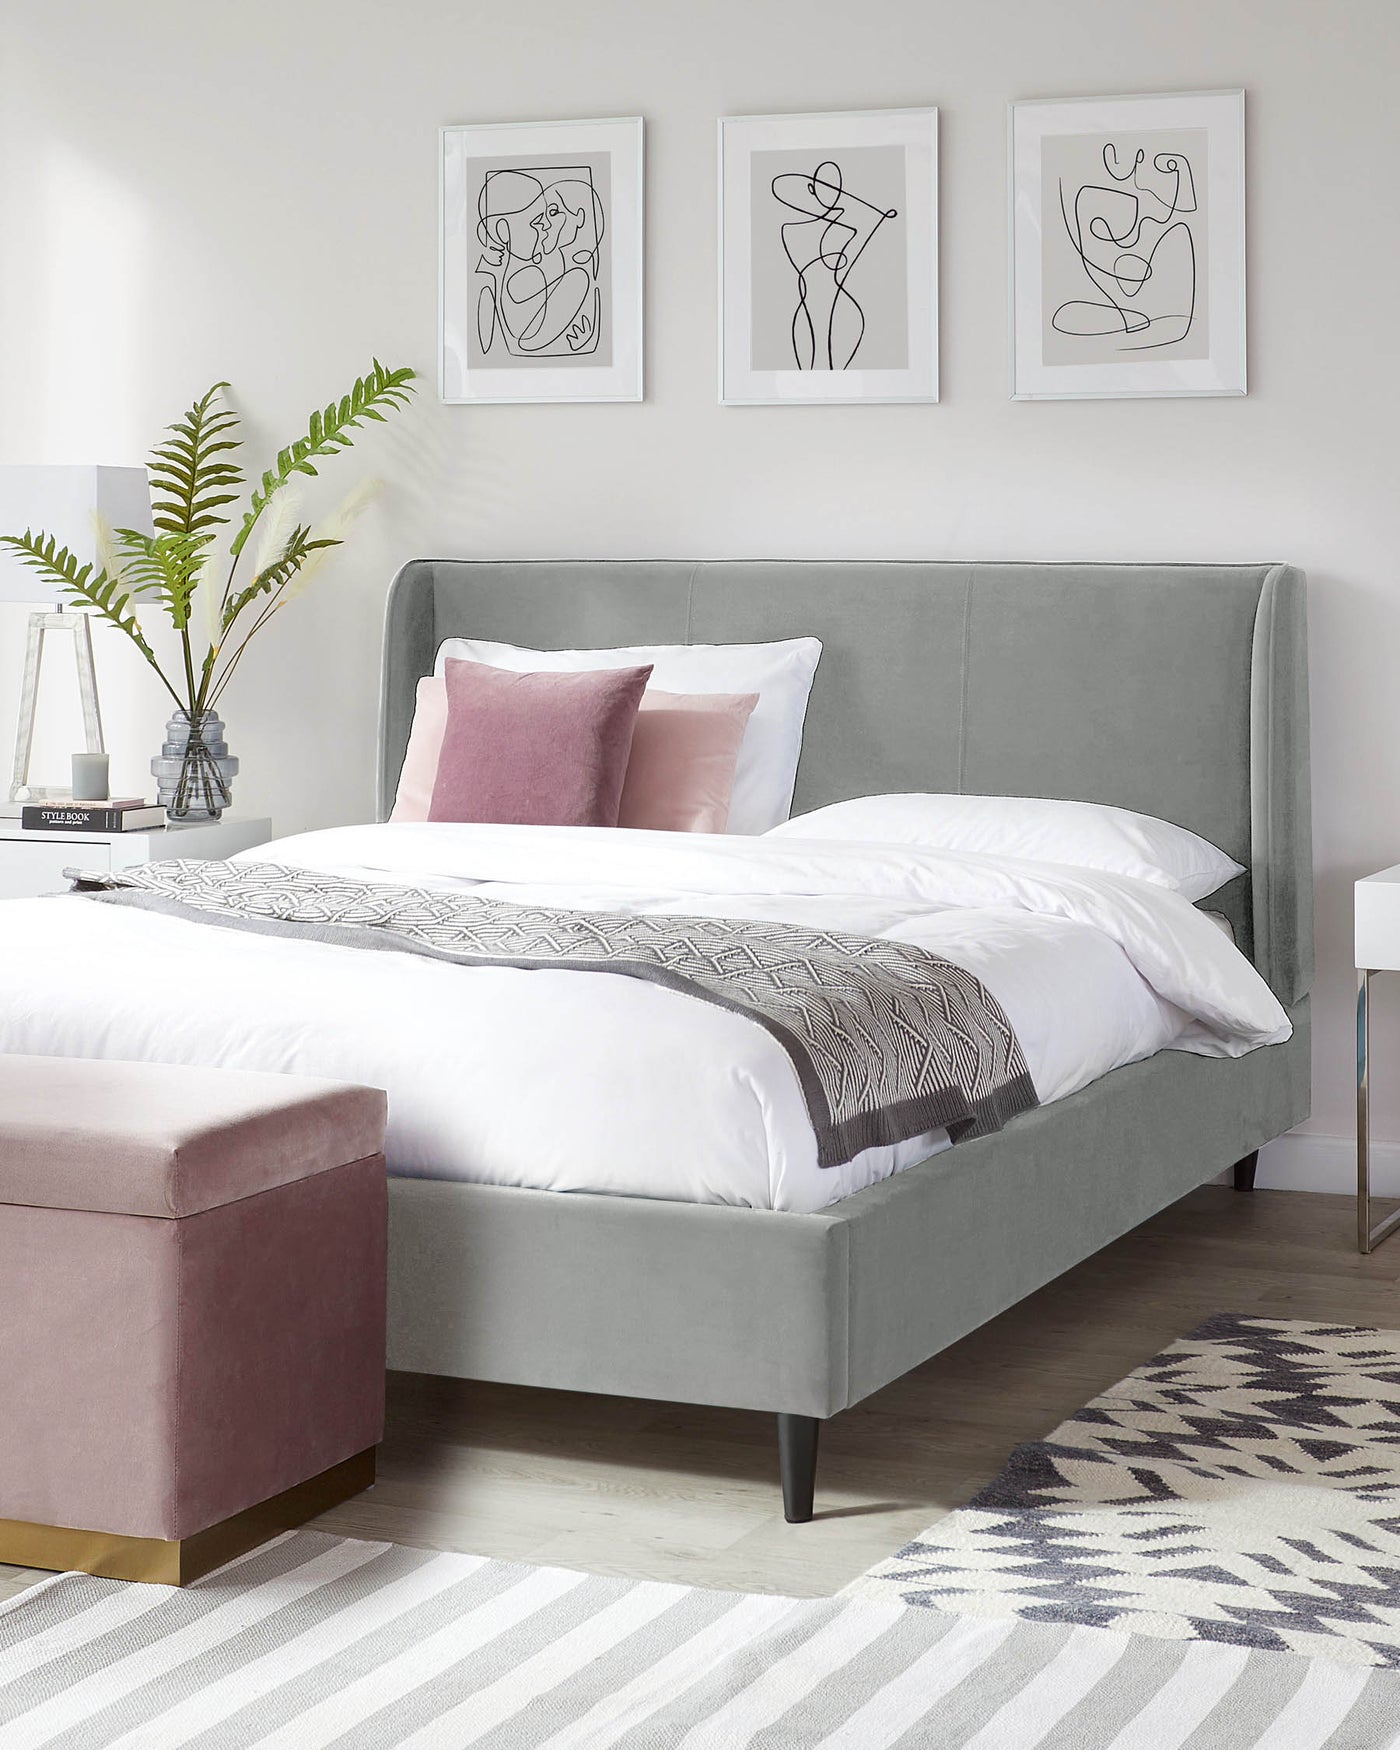 Elegant bedroom furniture set including a grey upholstered platform bed with a curved headboard design and a matching blush pink ottoman featuring a gold metal accent at the base.